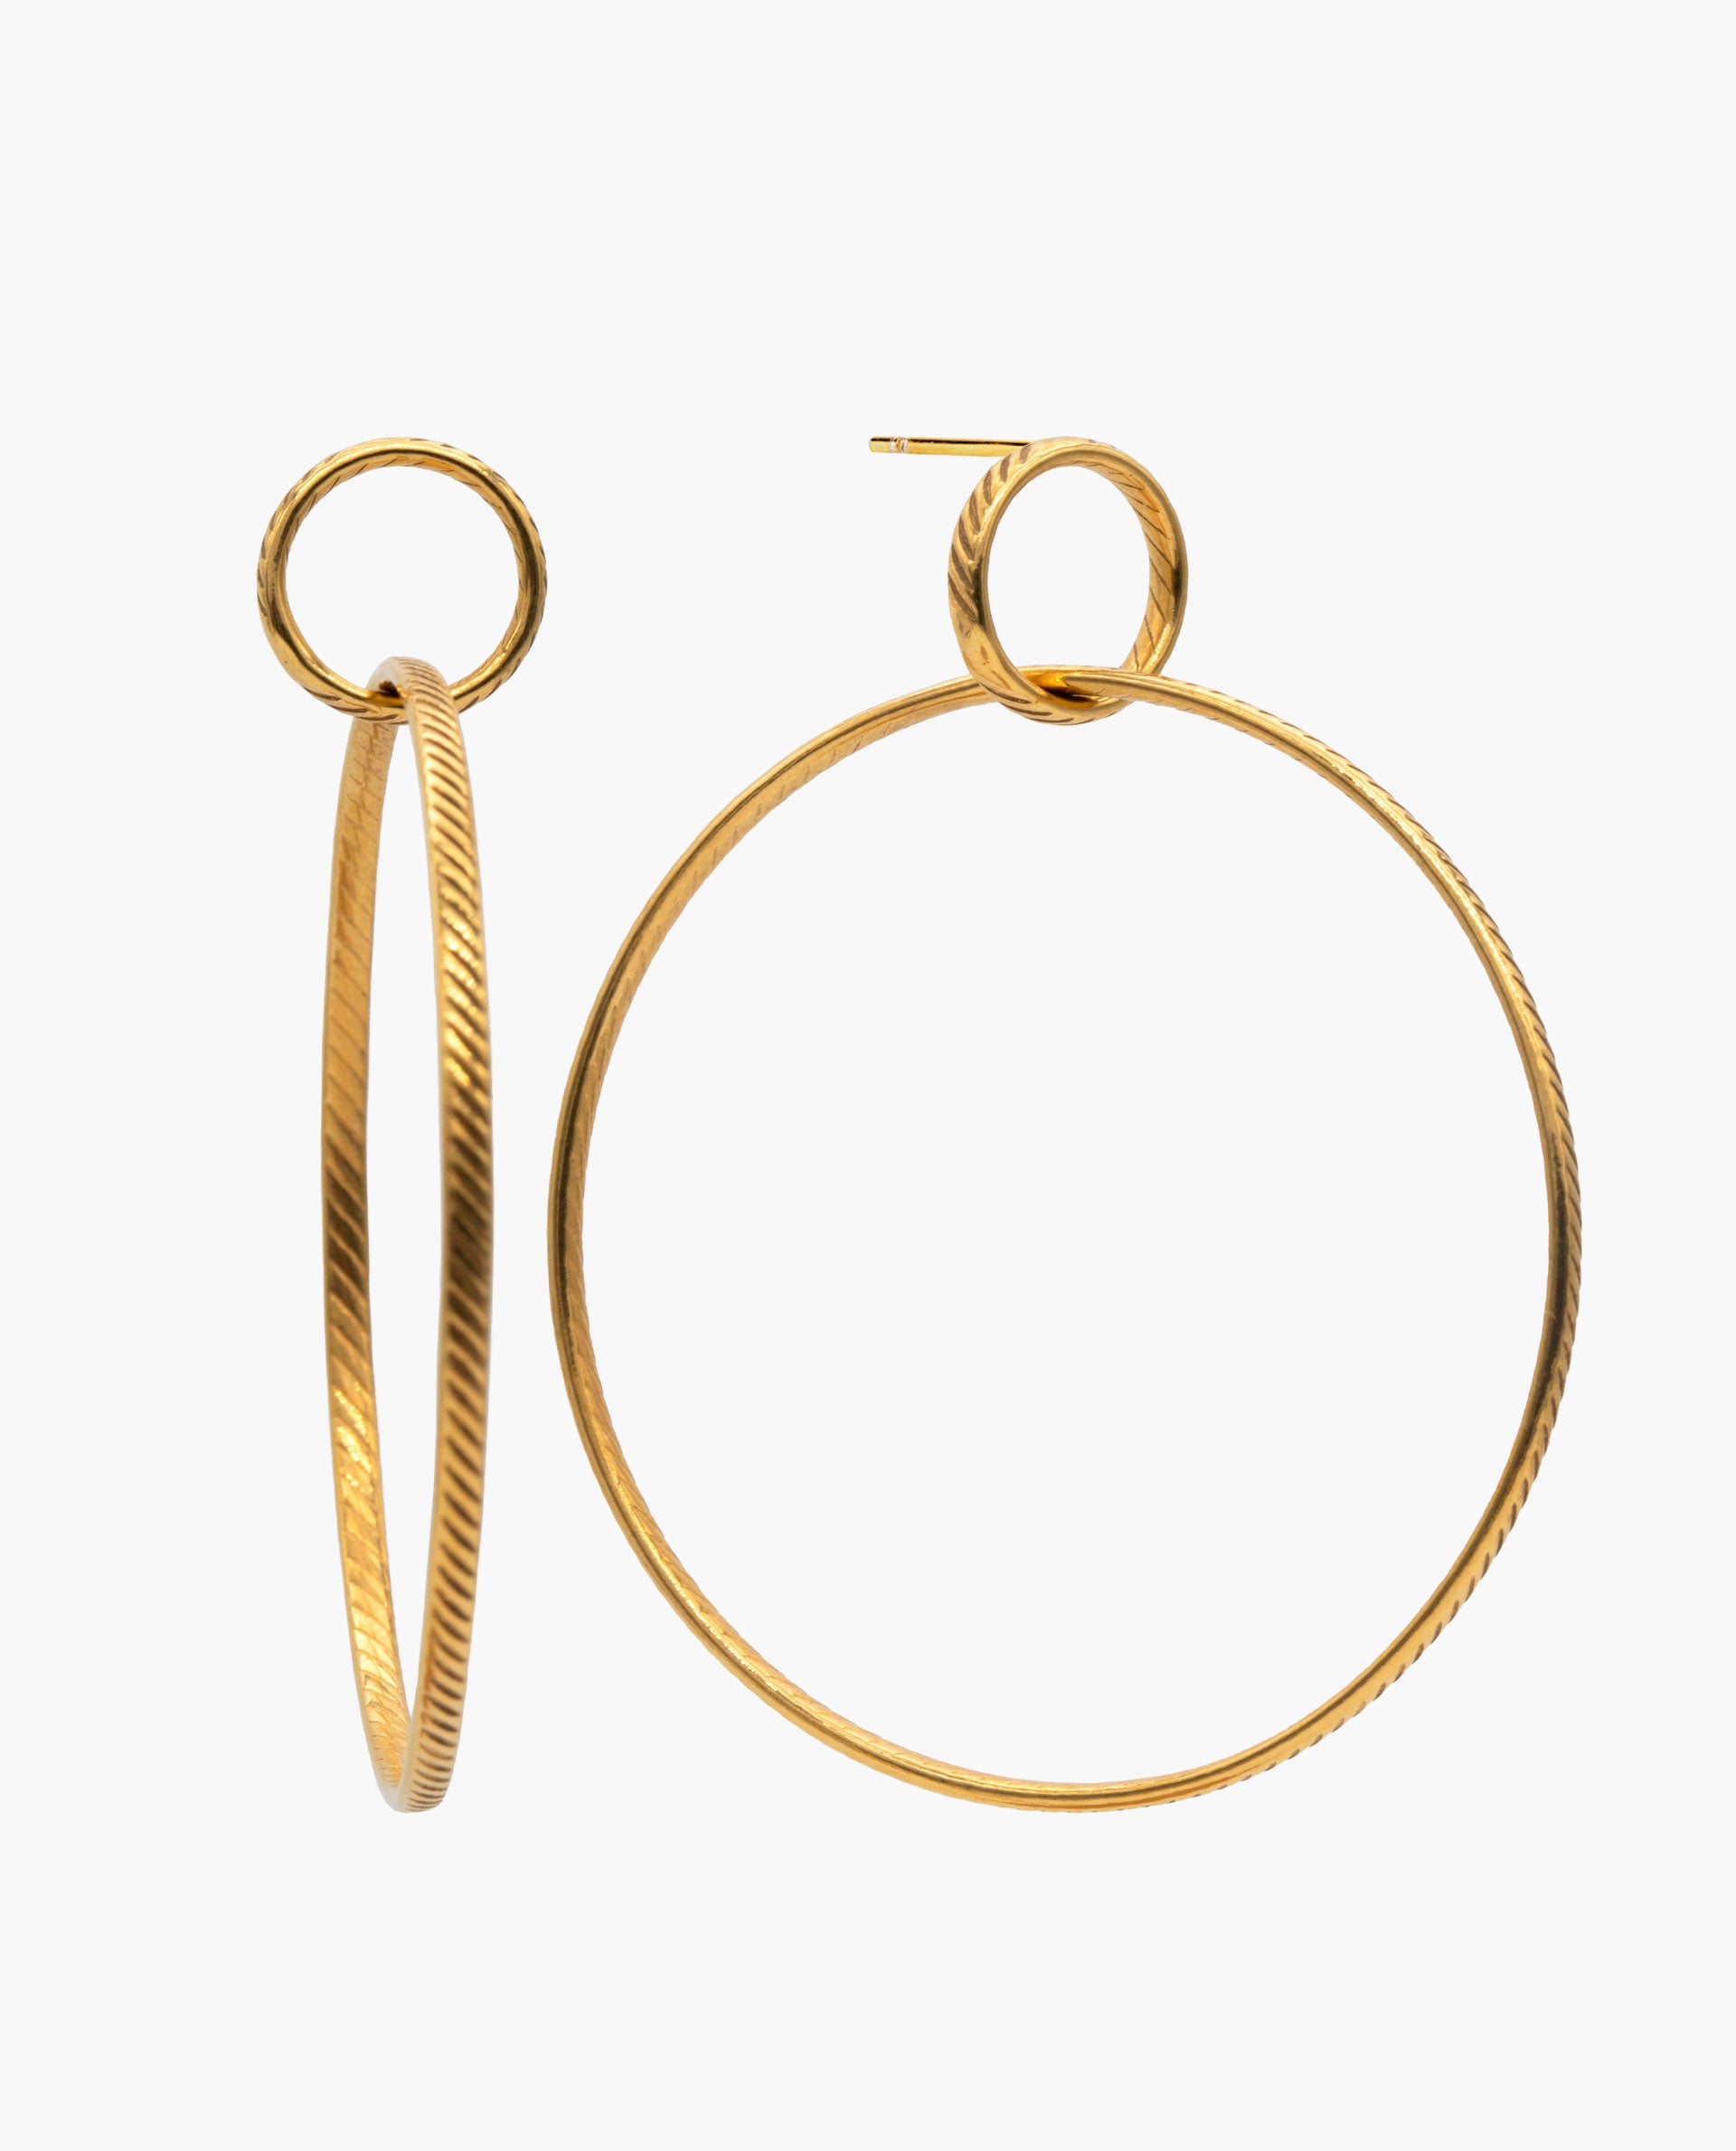 WISH EARRINGS - GOLD PLATED